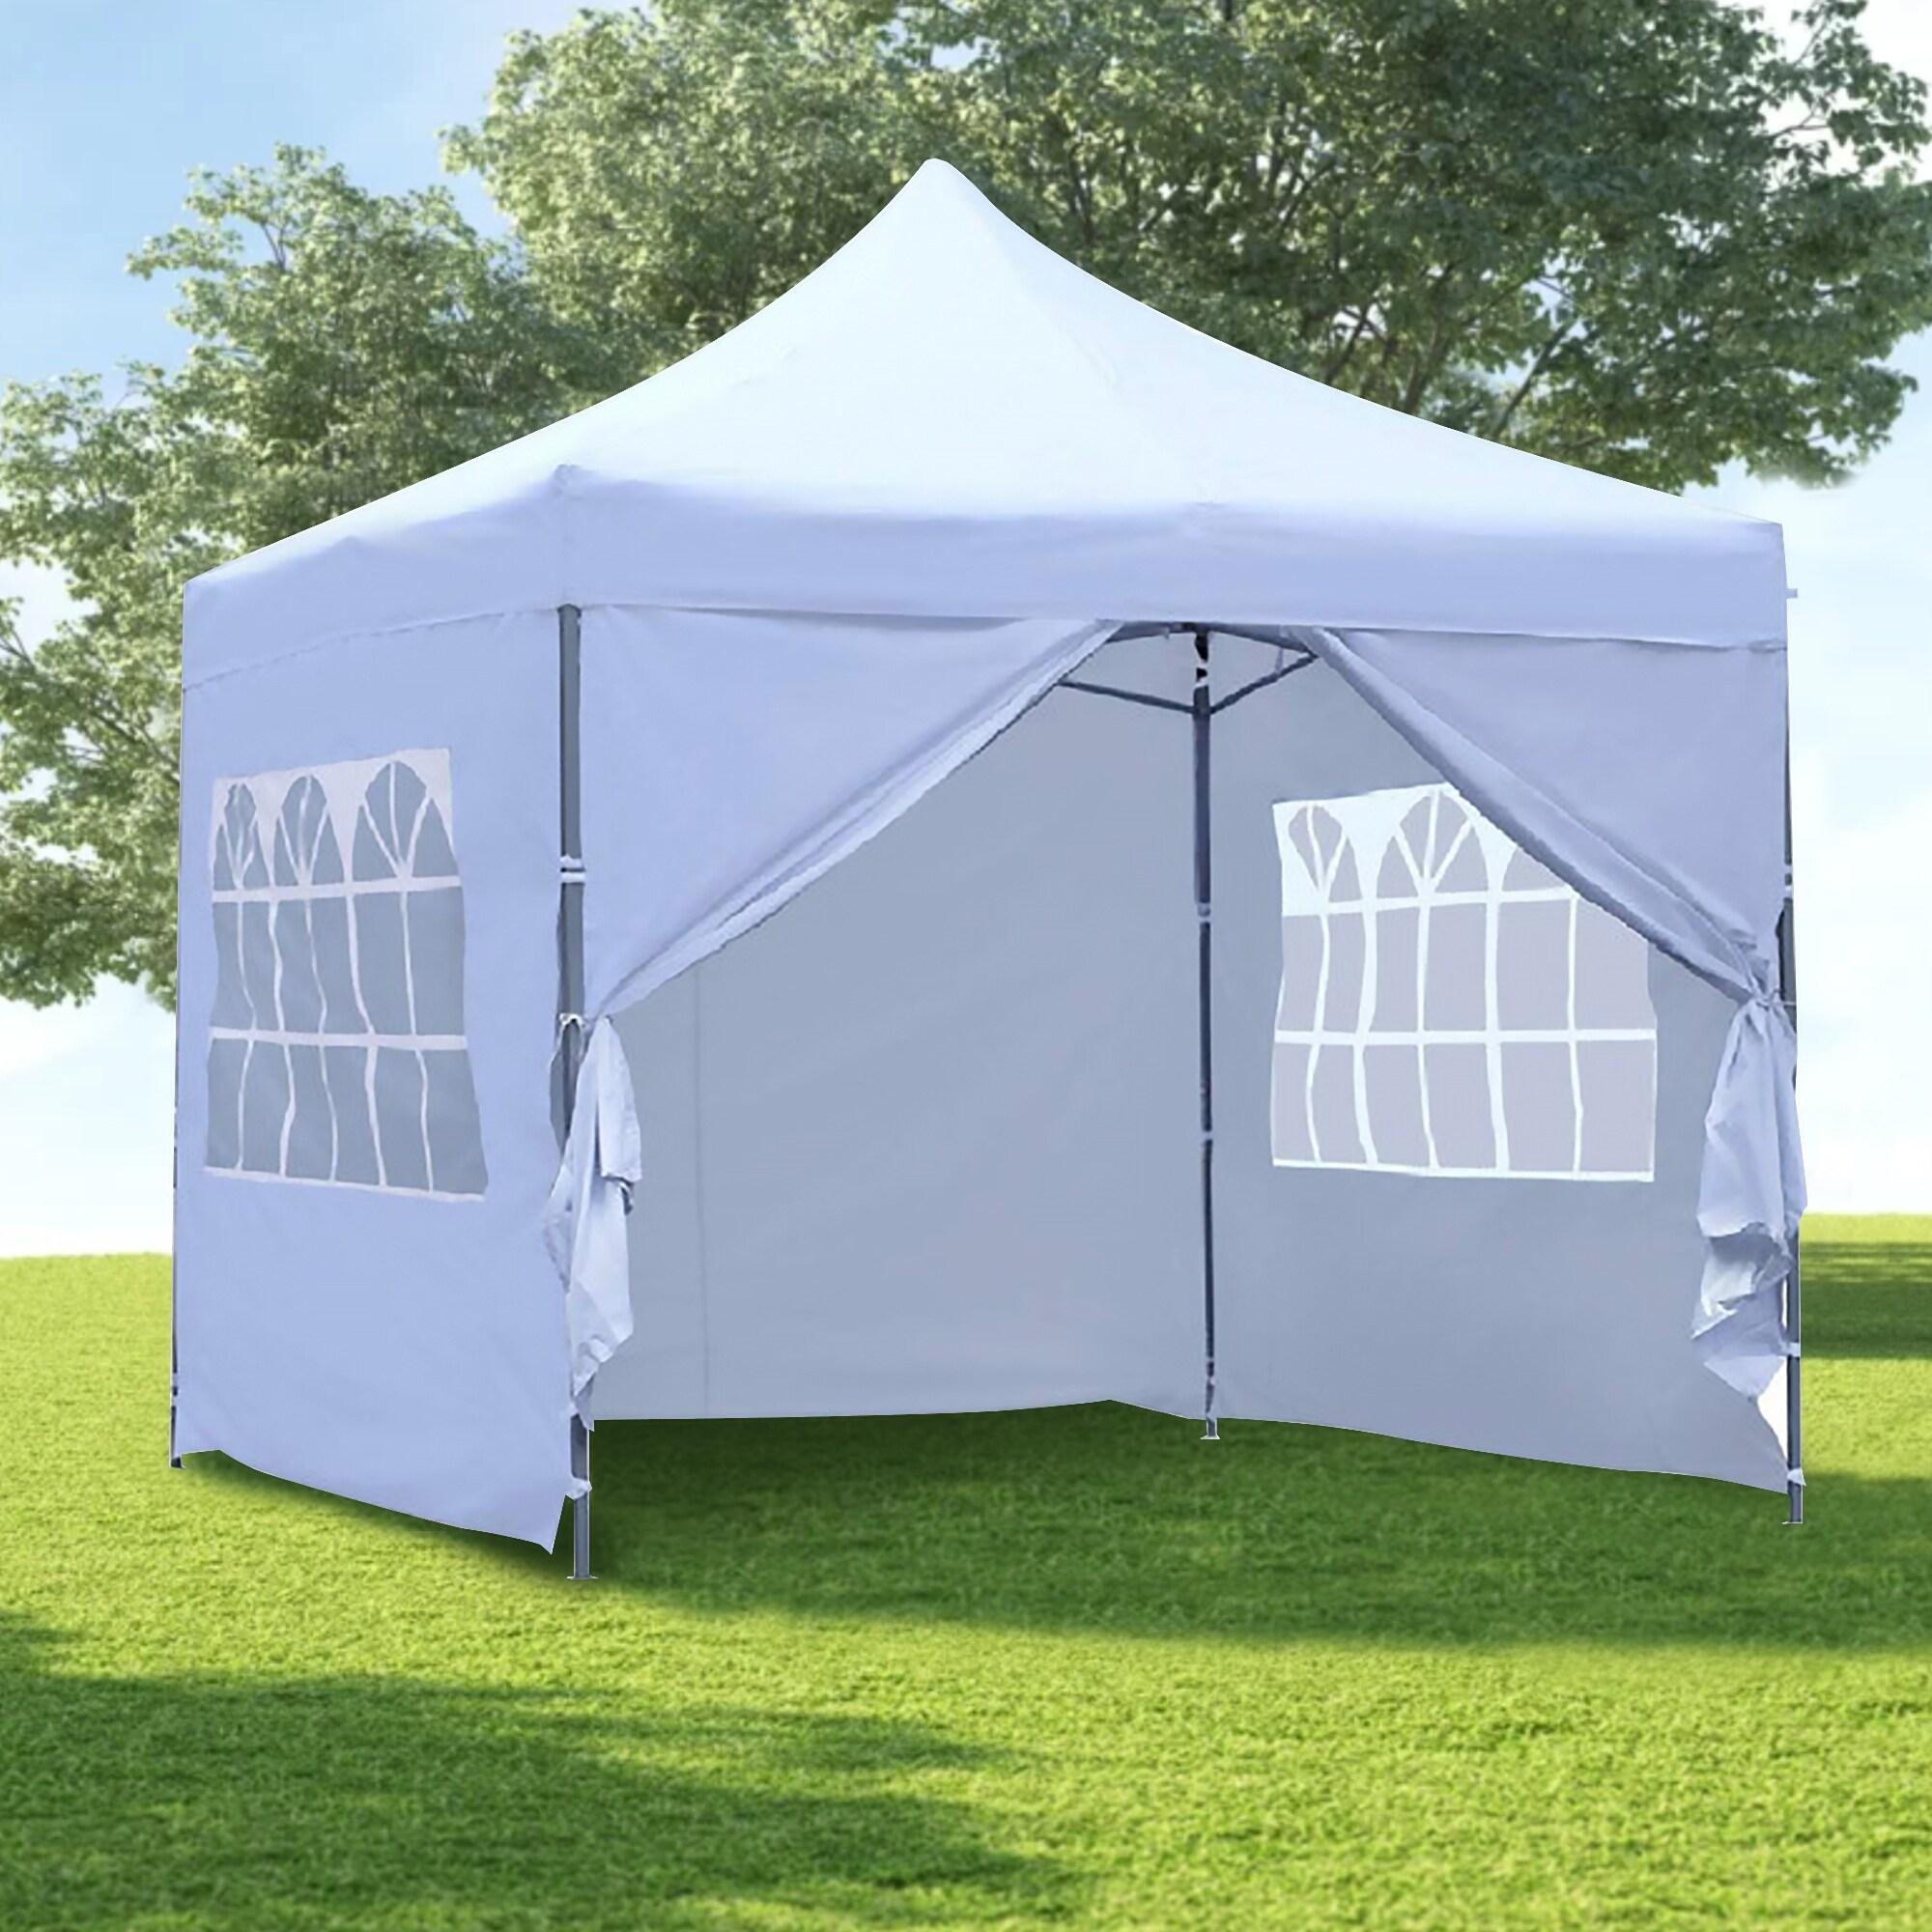 Ainfox  10x10 Ft Outdoor Pop-up Canopy Tent with Removable Sidewalls